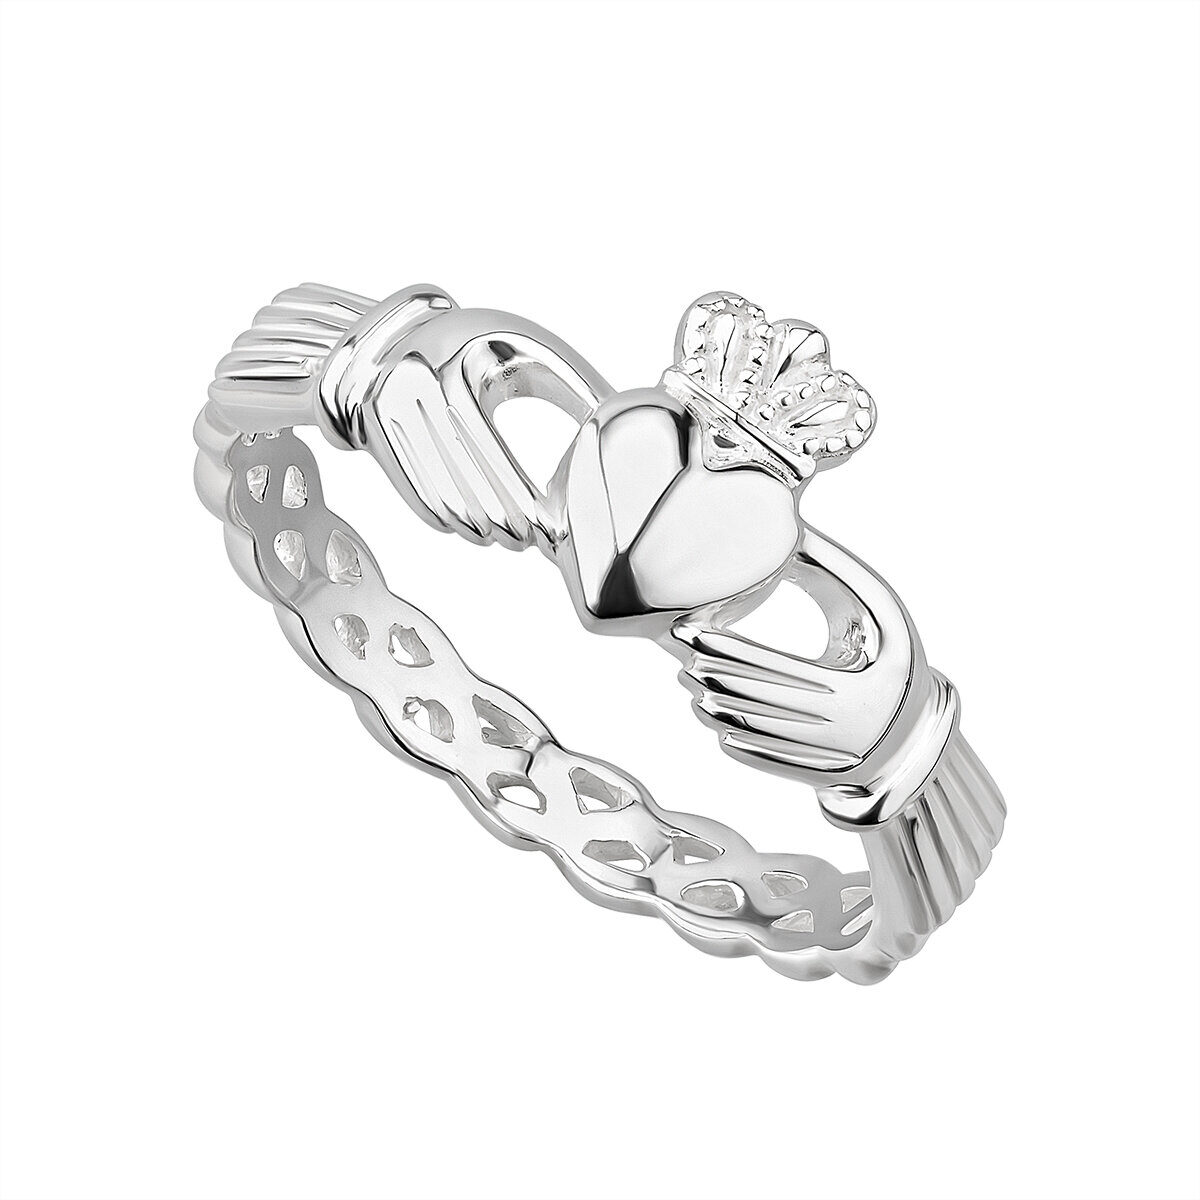 A silver claddagh ring with a braided band.